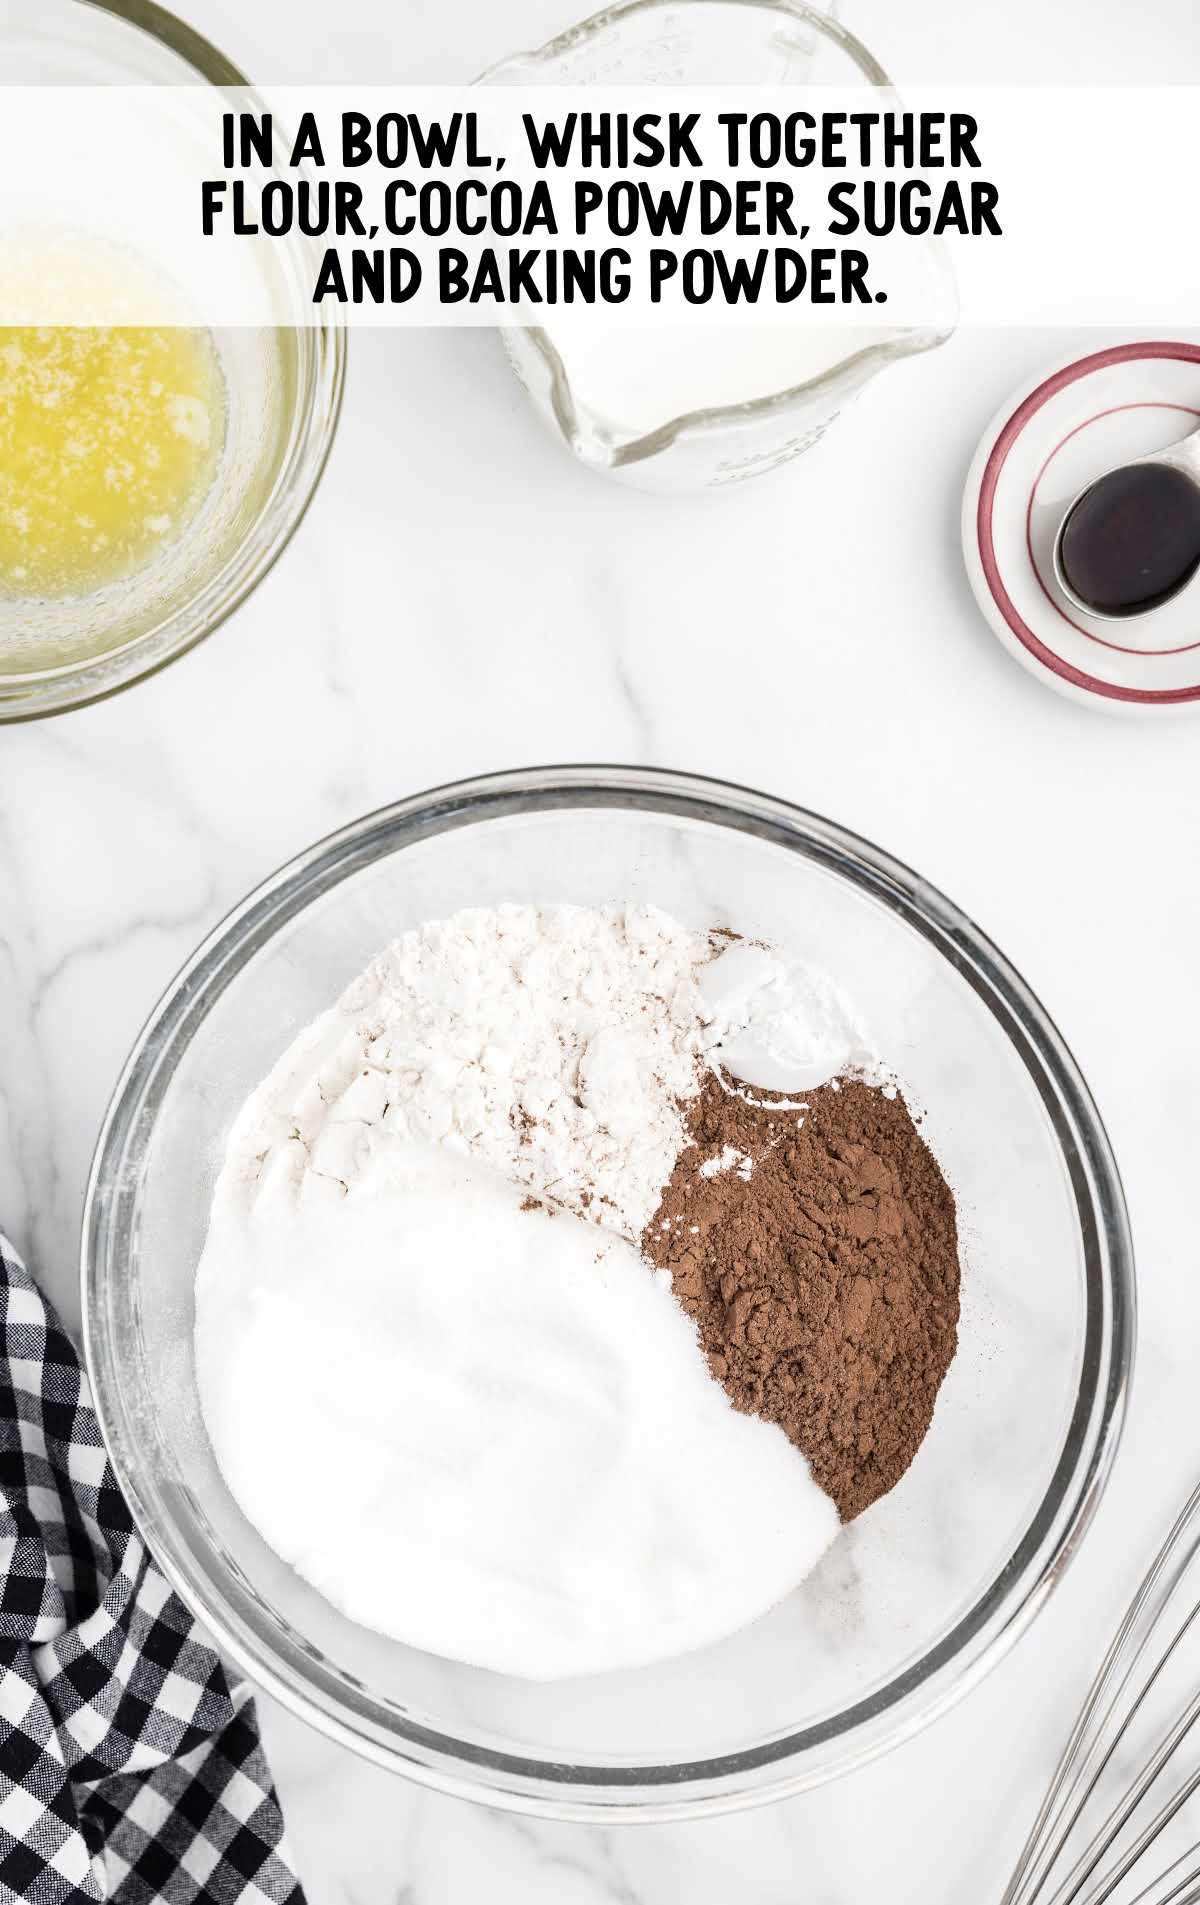 flour, cocoa powder, sugar, and baking powder whisked in a bowl